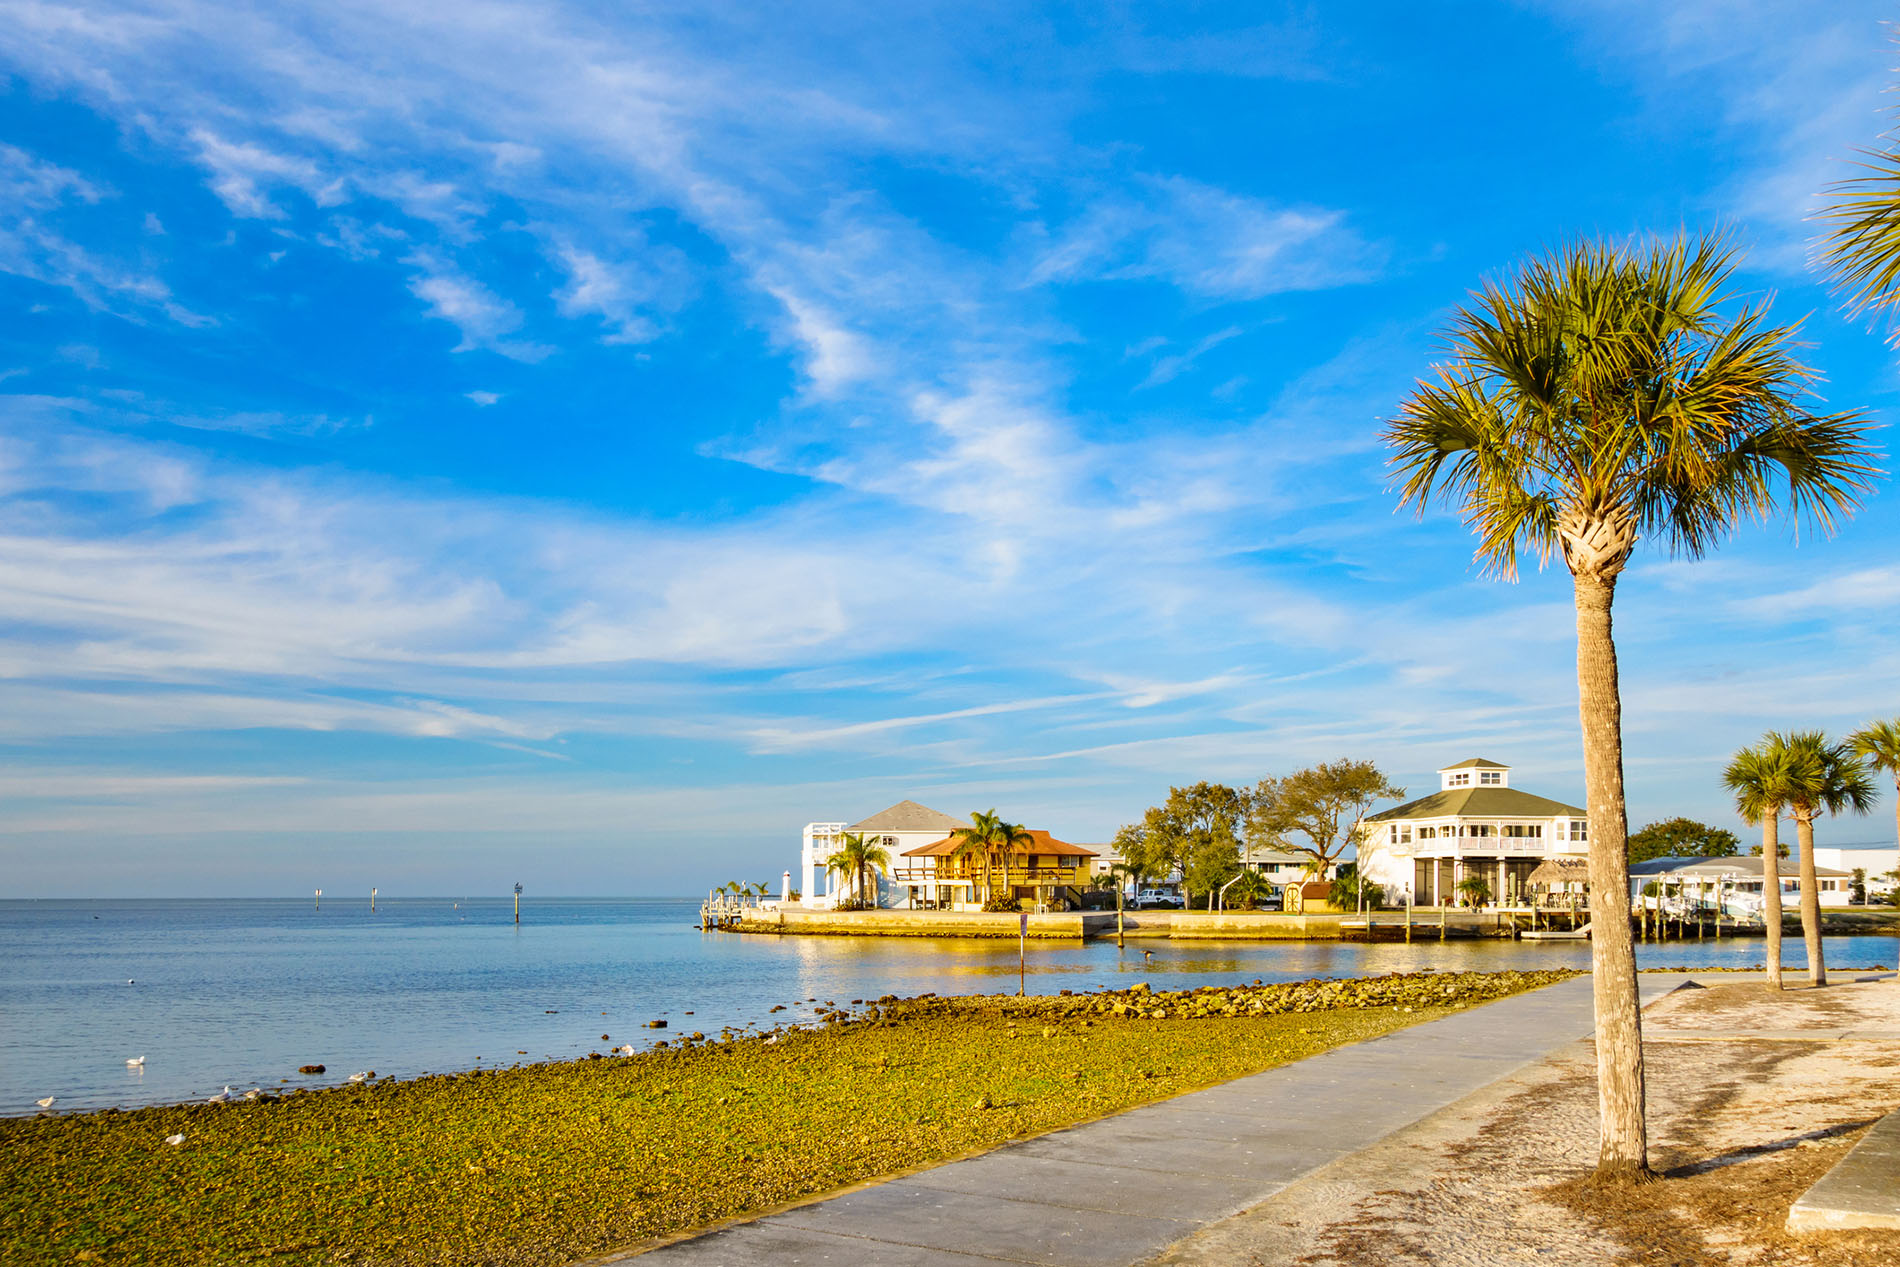 Photo of waterfront with palm trees and homes in Hudson, Florida, USA.